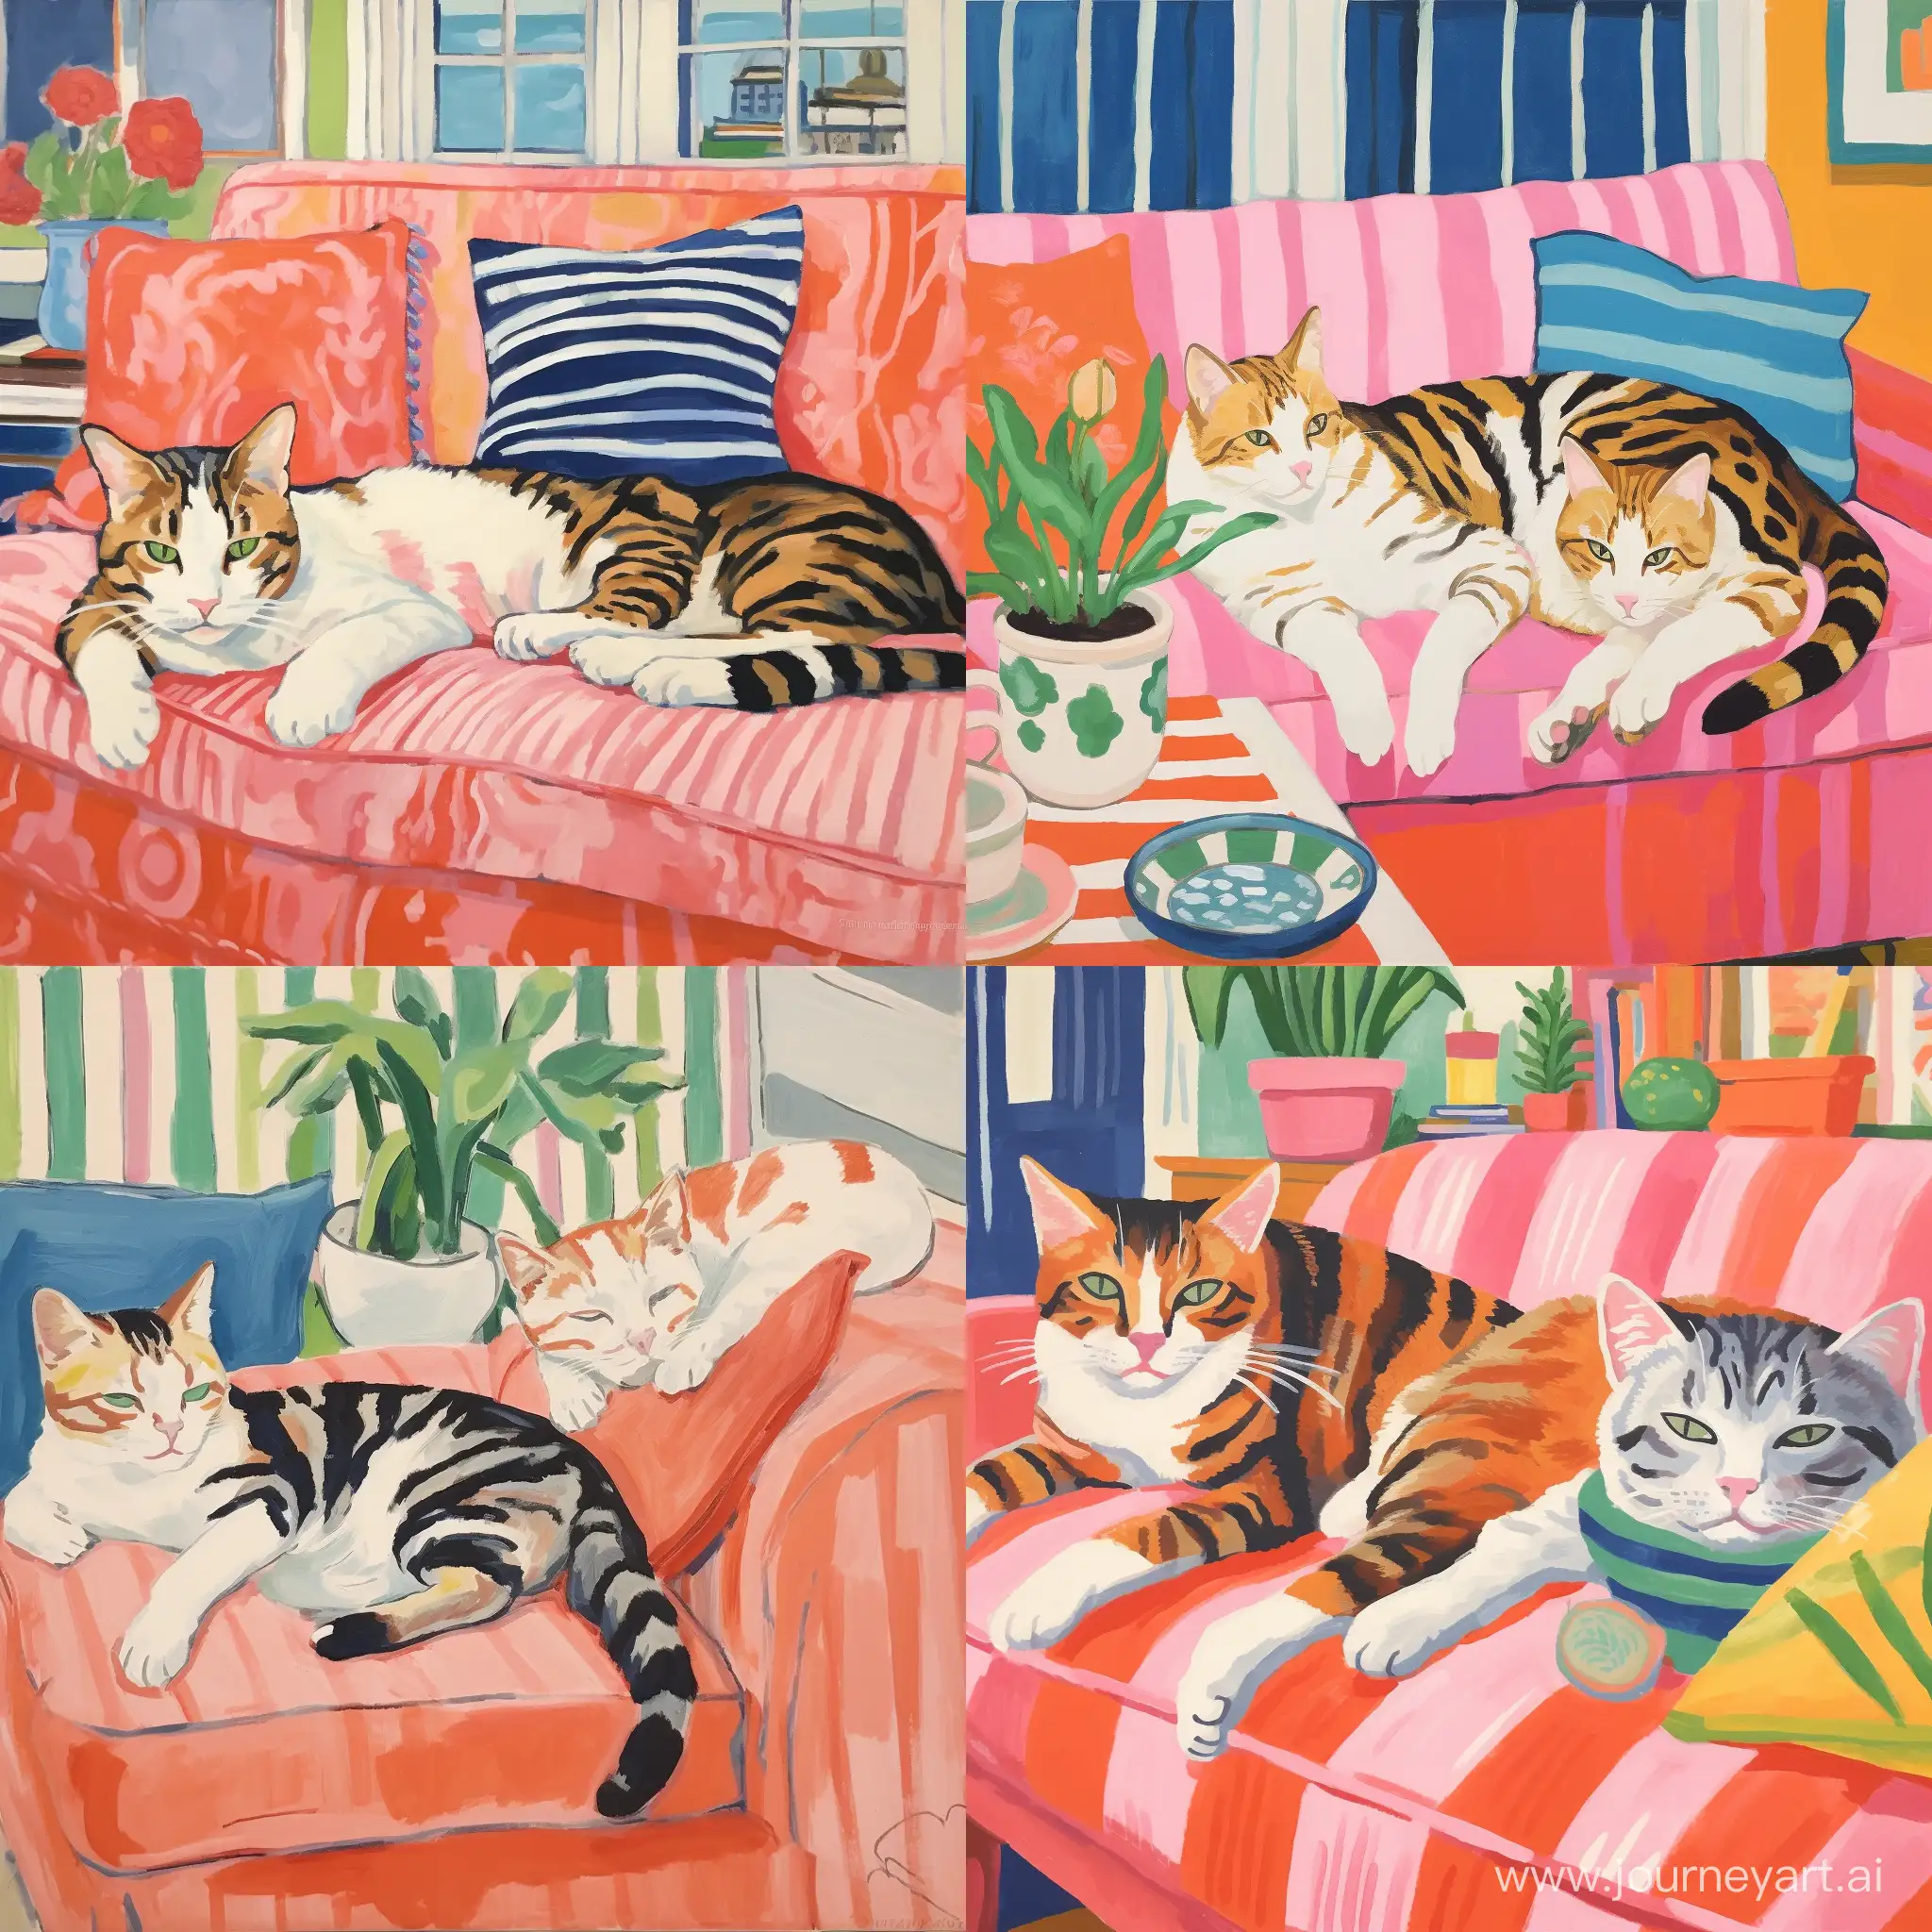 The image captures a serene indoor scene featuring two cats lounging comfortably on a couch. The dominant color in the image is a soothing shade of pink, which probably corresponds to the color of the sofa. One of the cats, striped, is stretched out on a large part of the sofa, her small or medium body is relaxed in sleep or rest. Another cat, also striped, the cats' fur and whiskers are clearly visible, which gives this image a sense of calm in the room.